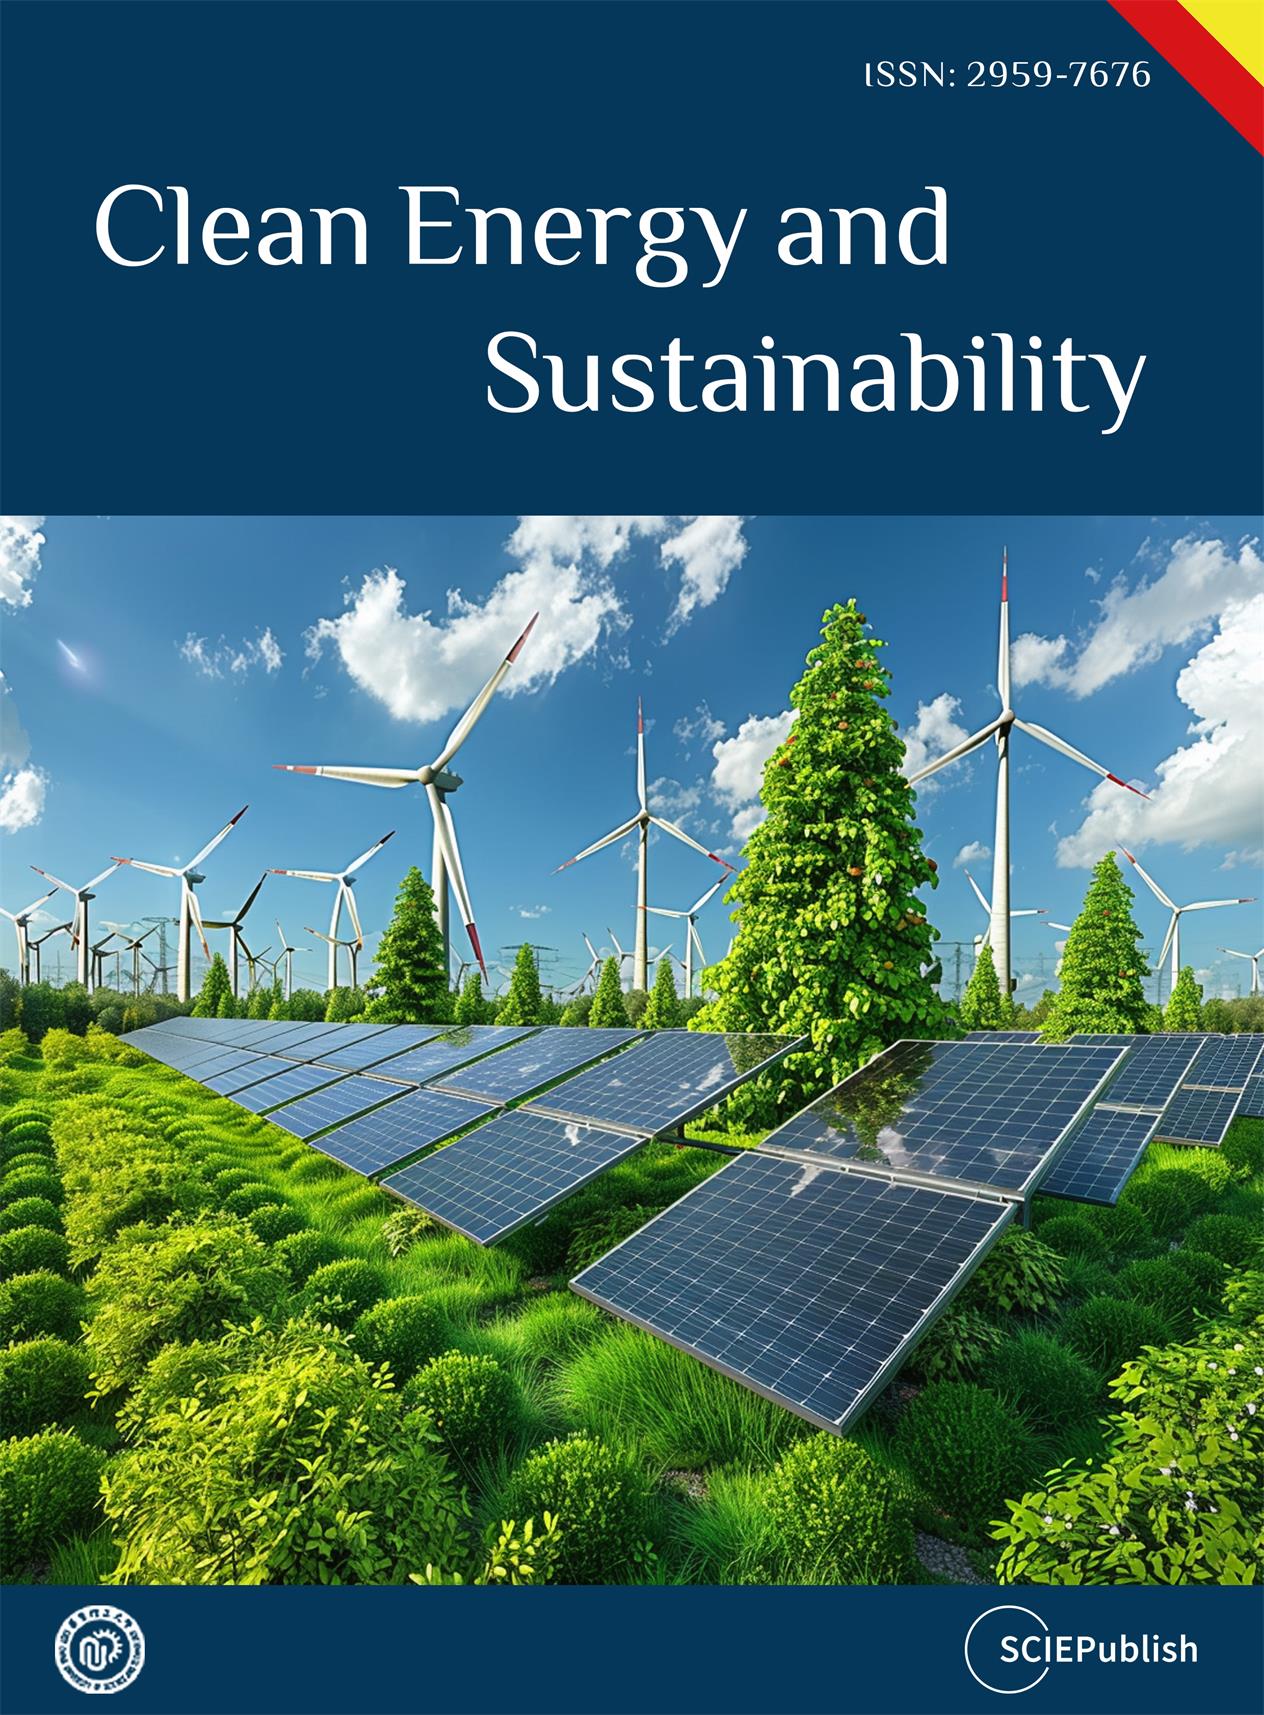 Clean Energy and Sustainability-logo